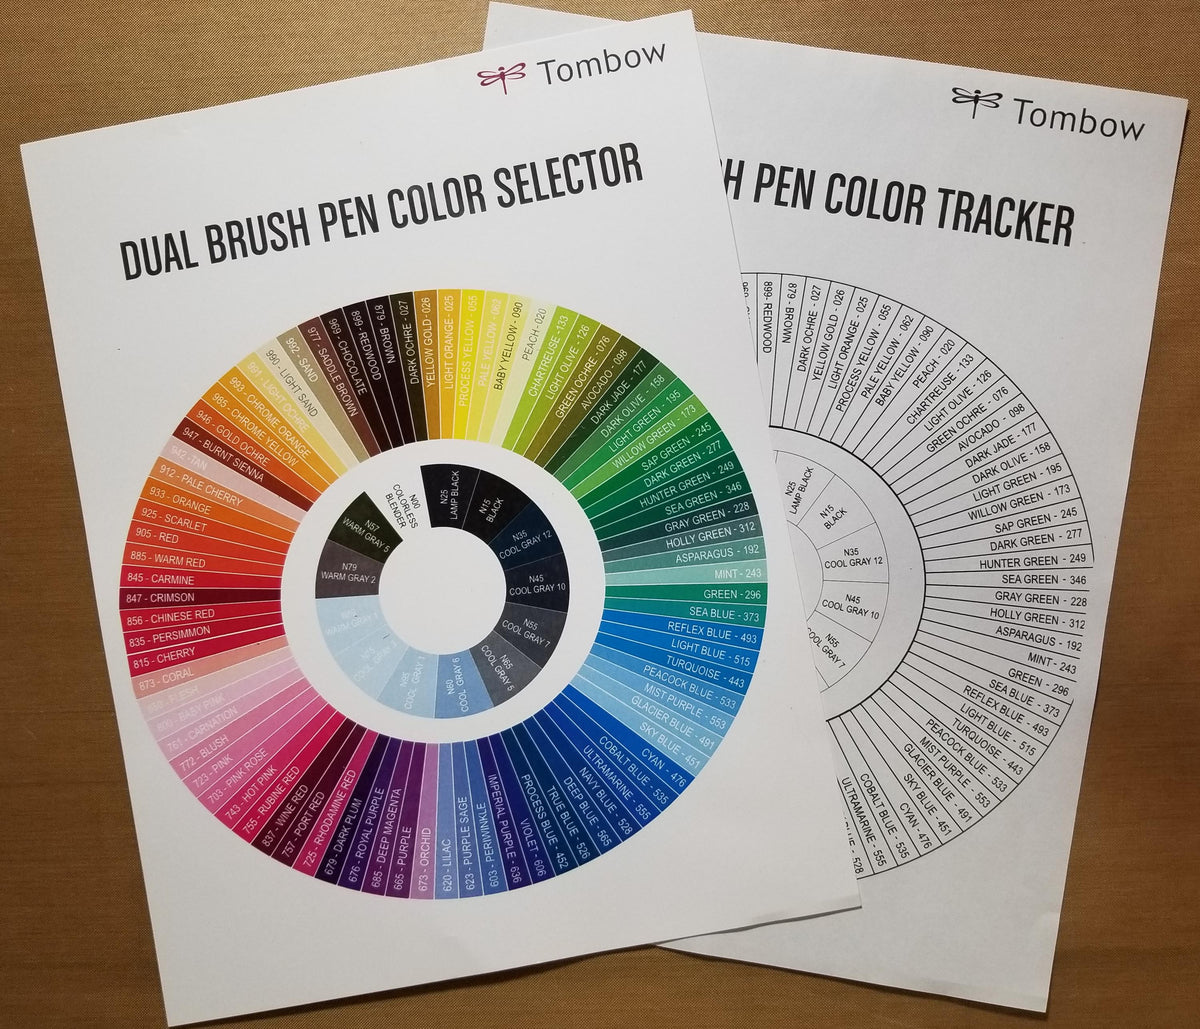 Tombow Brush Pen Color Selector and Color Tracker